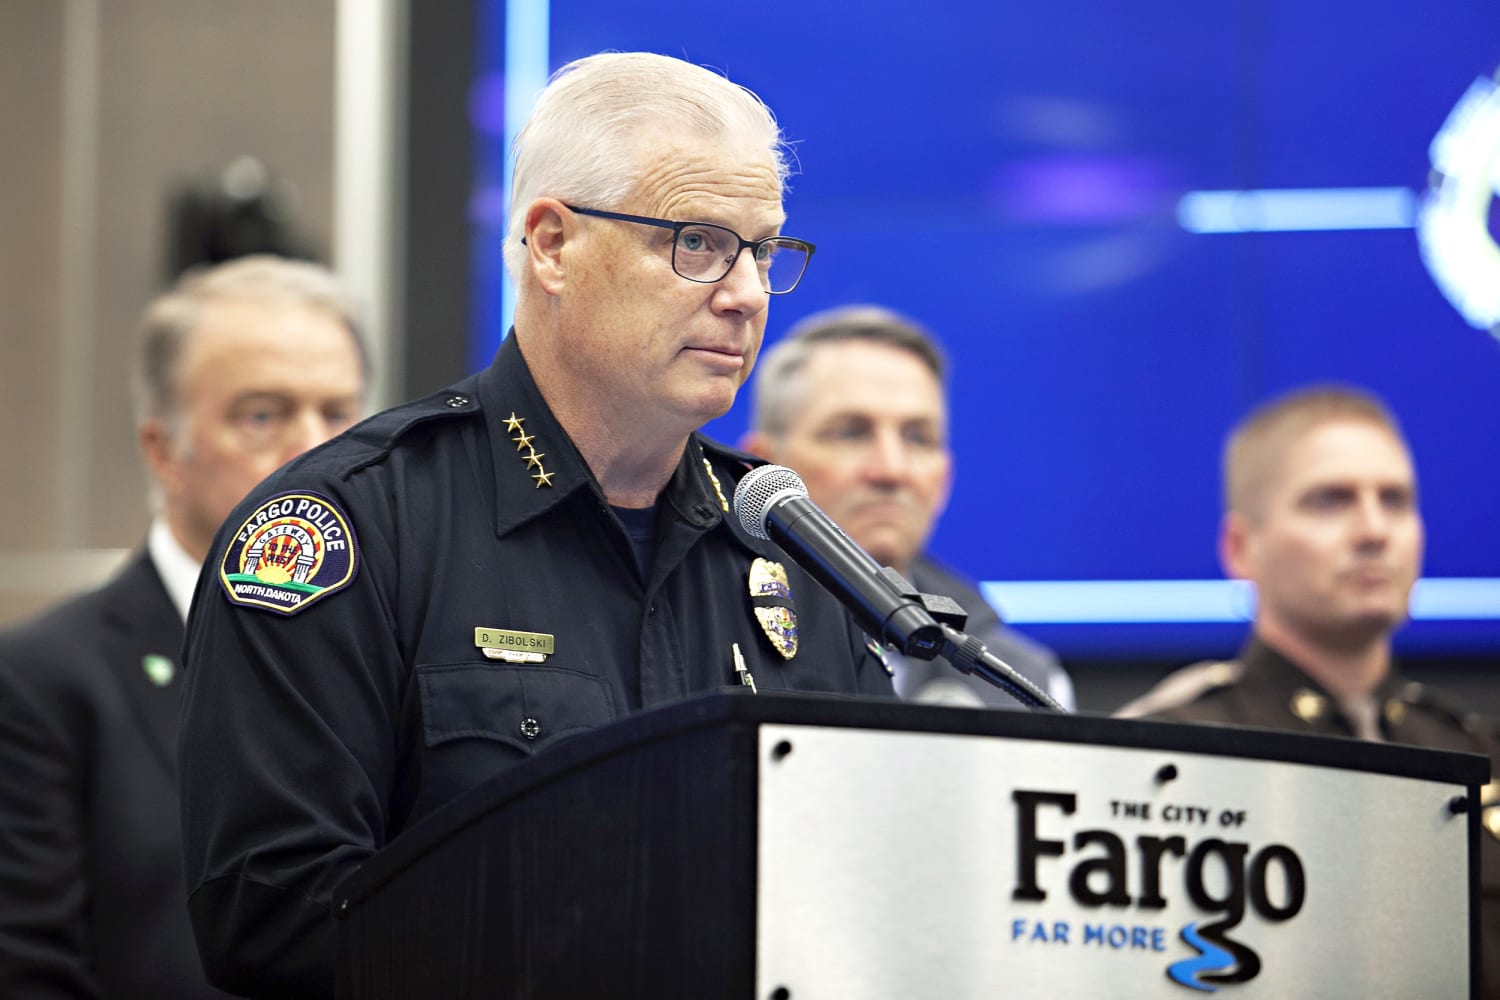 Gunman who ‘ambushed’ Fargo officers had 1,800 rounds of ammunition and a grenade, AG says